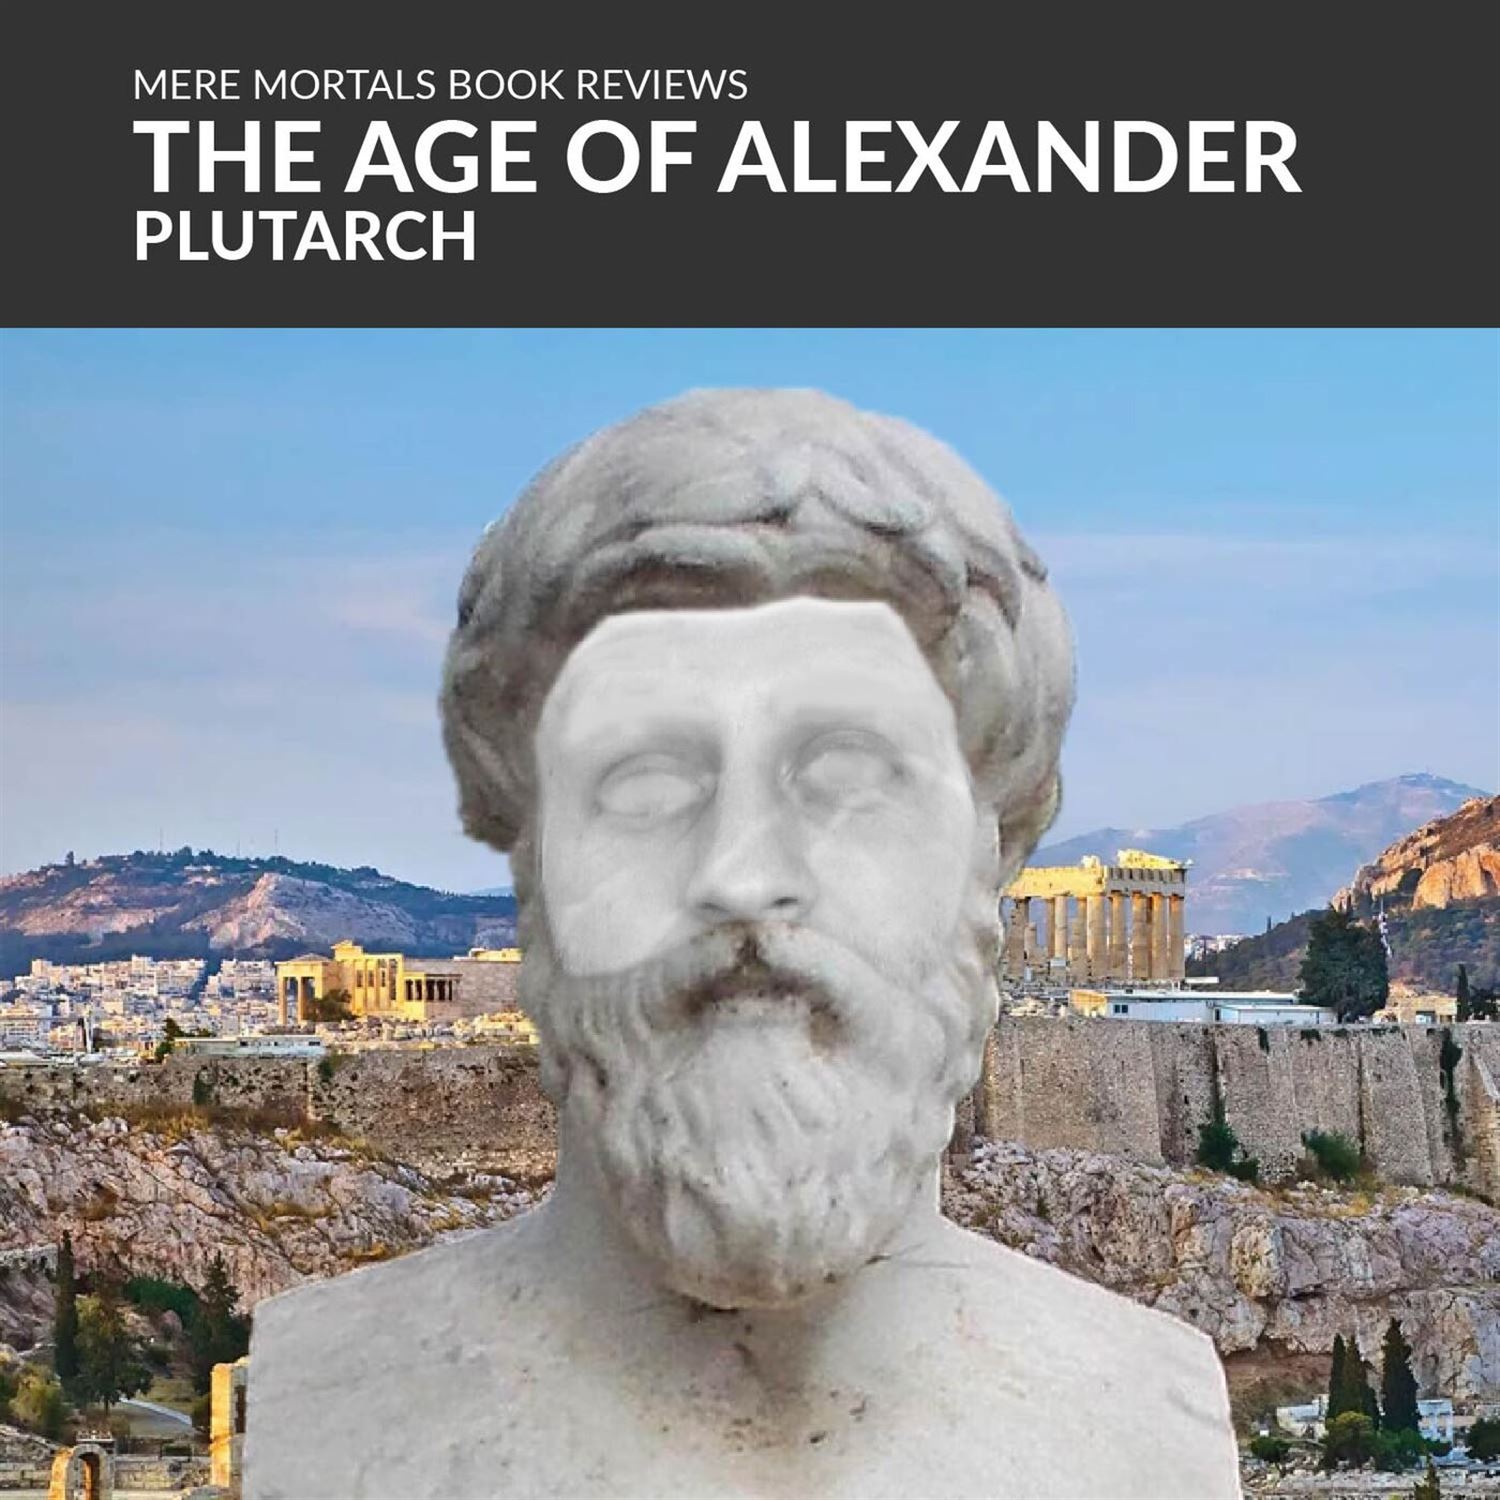 The Age Of Alexander by Plutarch